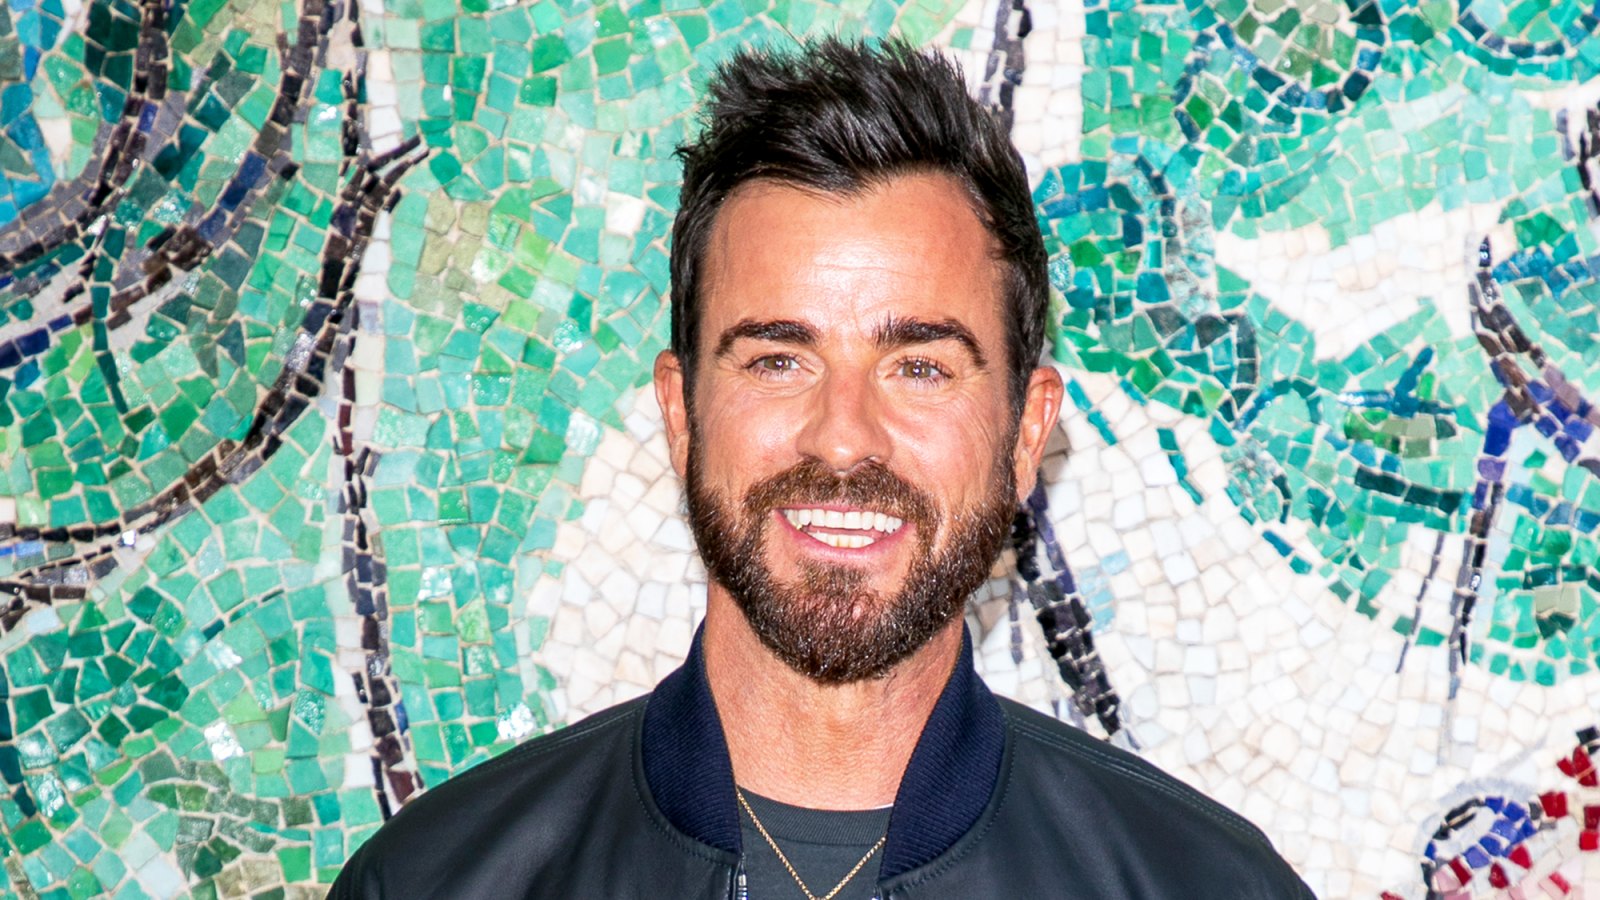 Justin Theroux attends Louis Vuitton 2019 Cruise Collection at Fondation Maeght in Saint-Paul-De-Vence, France.